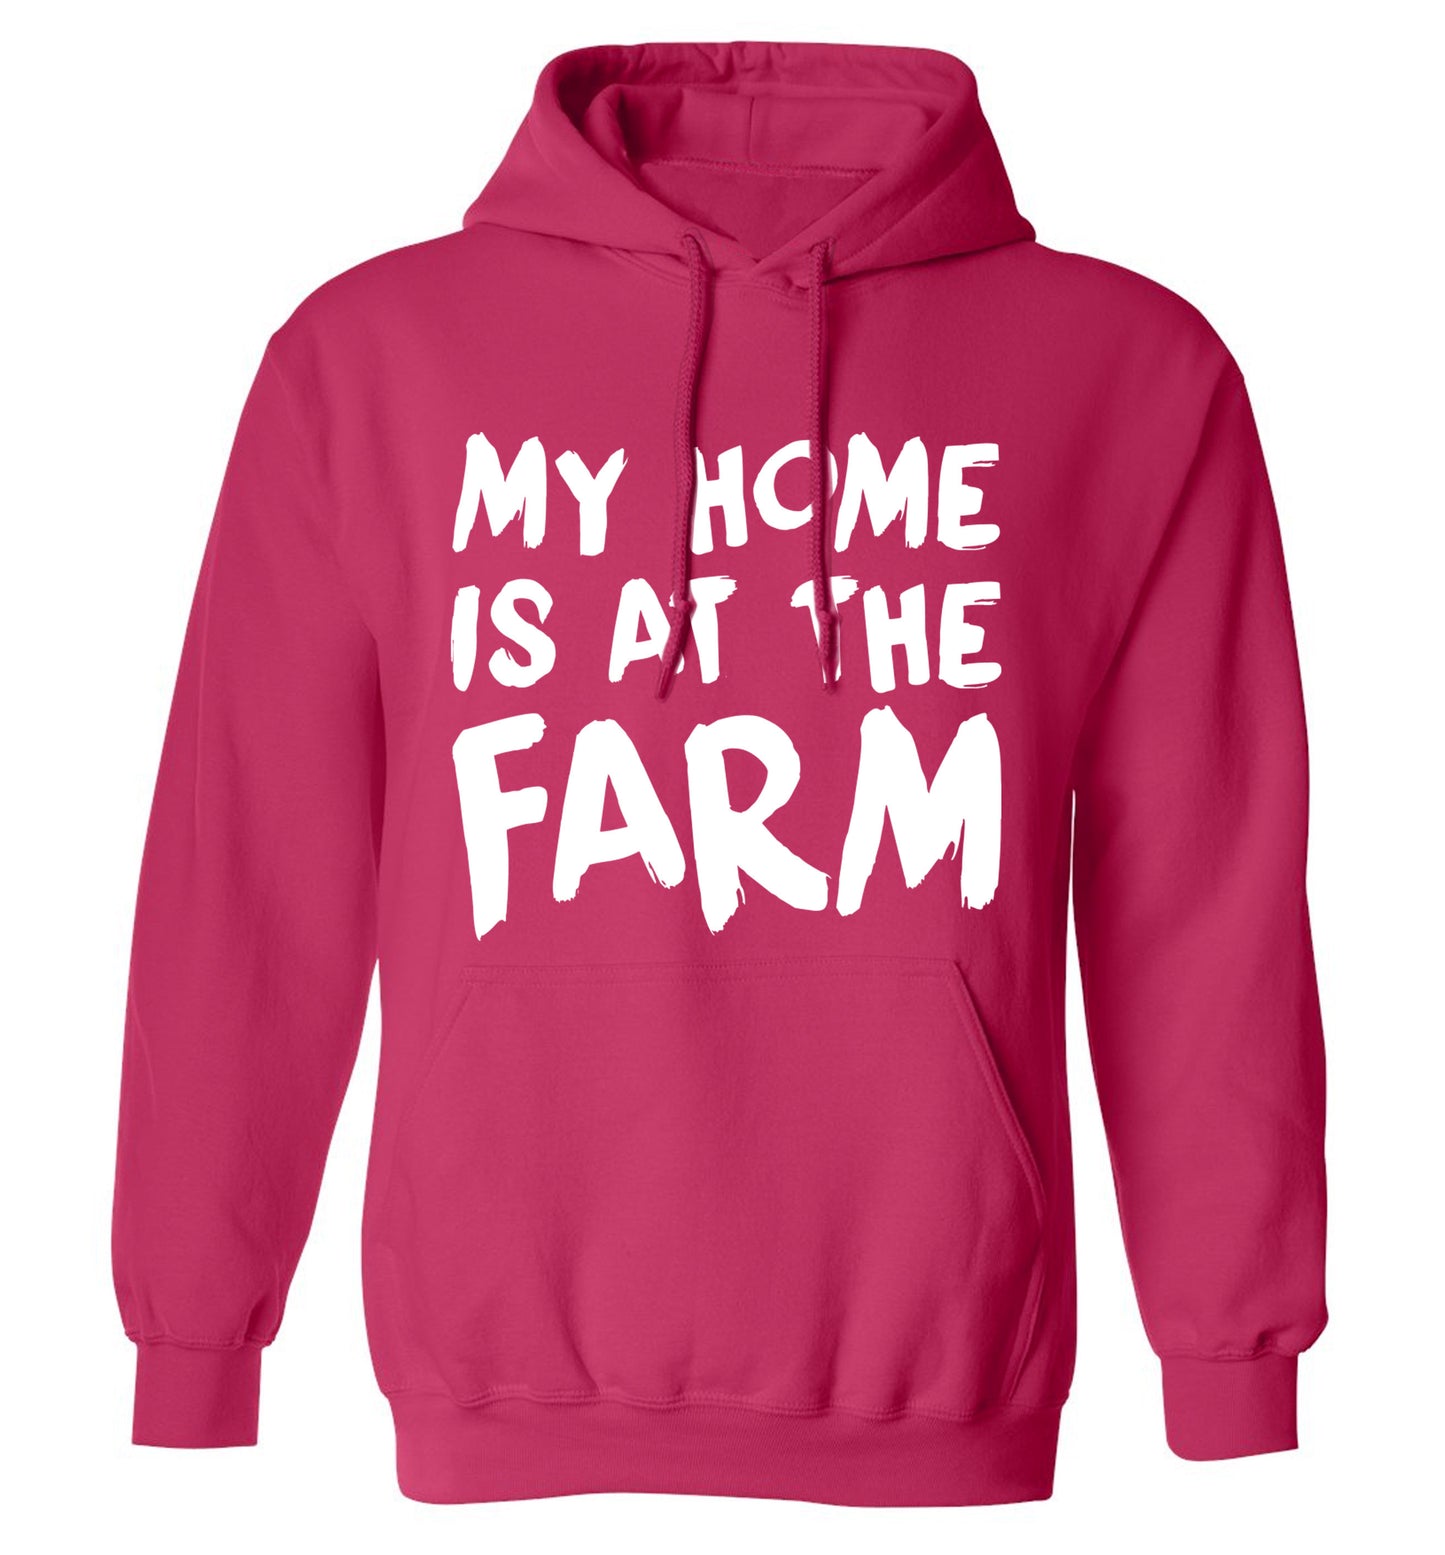 My home is at the farm adults unisex pink hoodie 2XL